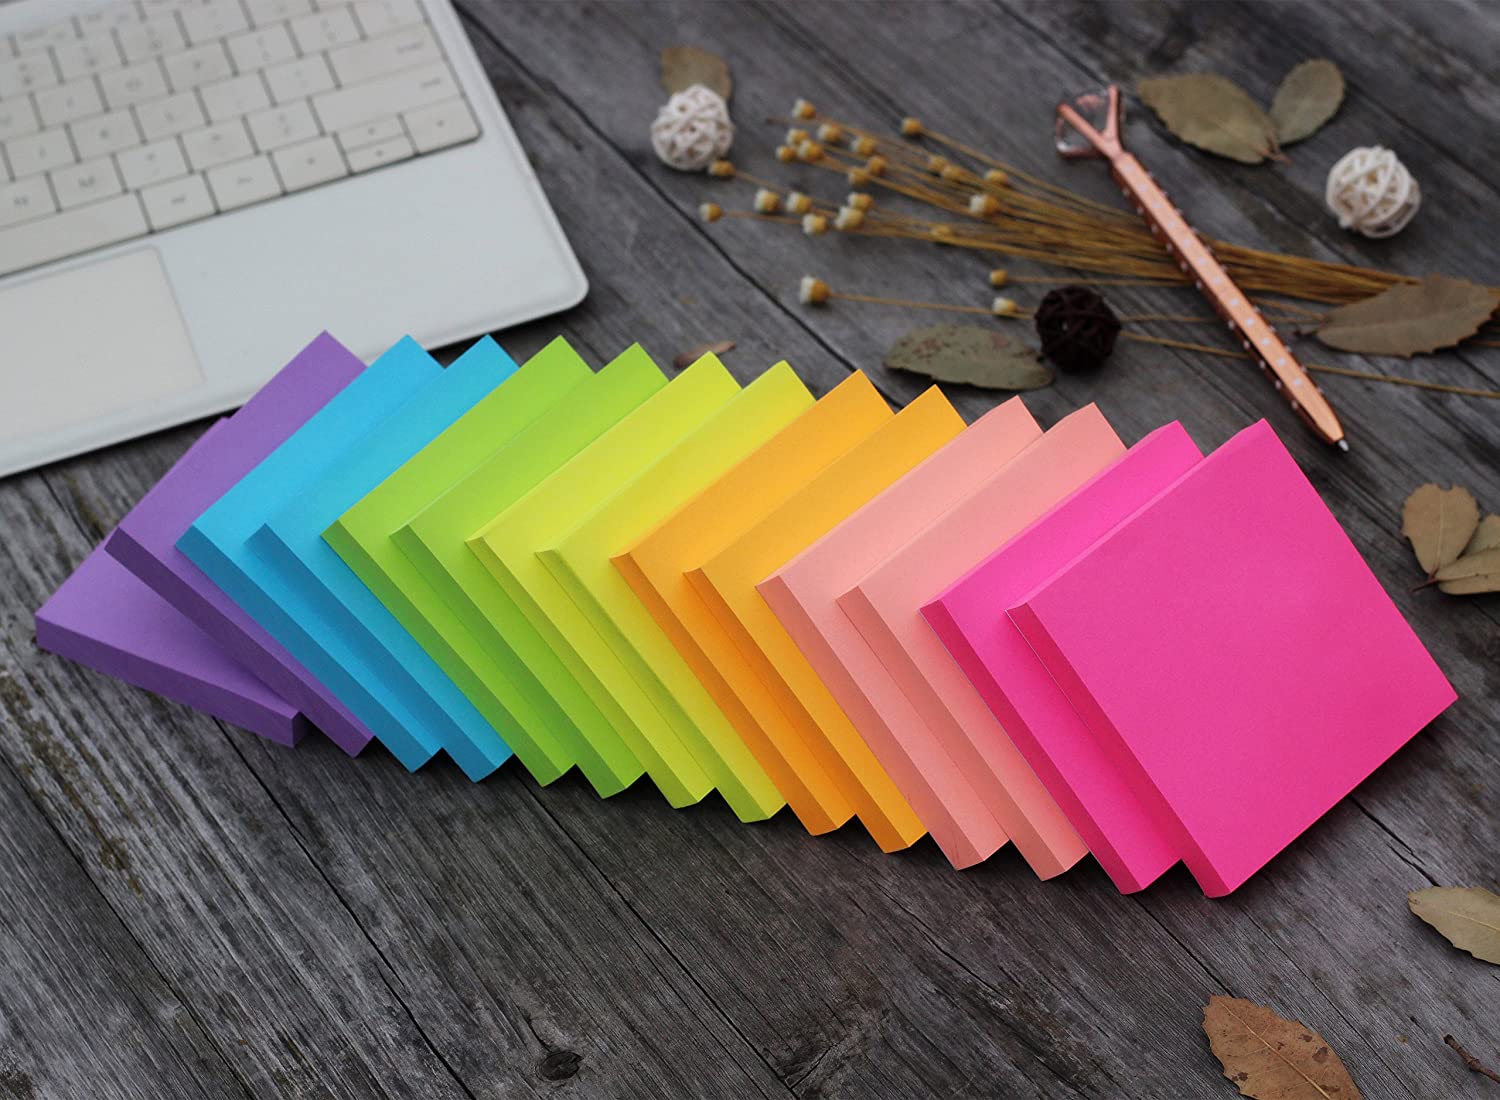 Early Buy 7 Bright Color Sticky Notes Self-Stick Notes 3 in x 3 in 80 Sheets//Pad 14 Pads Quality Improved